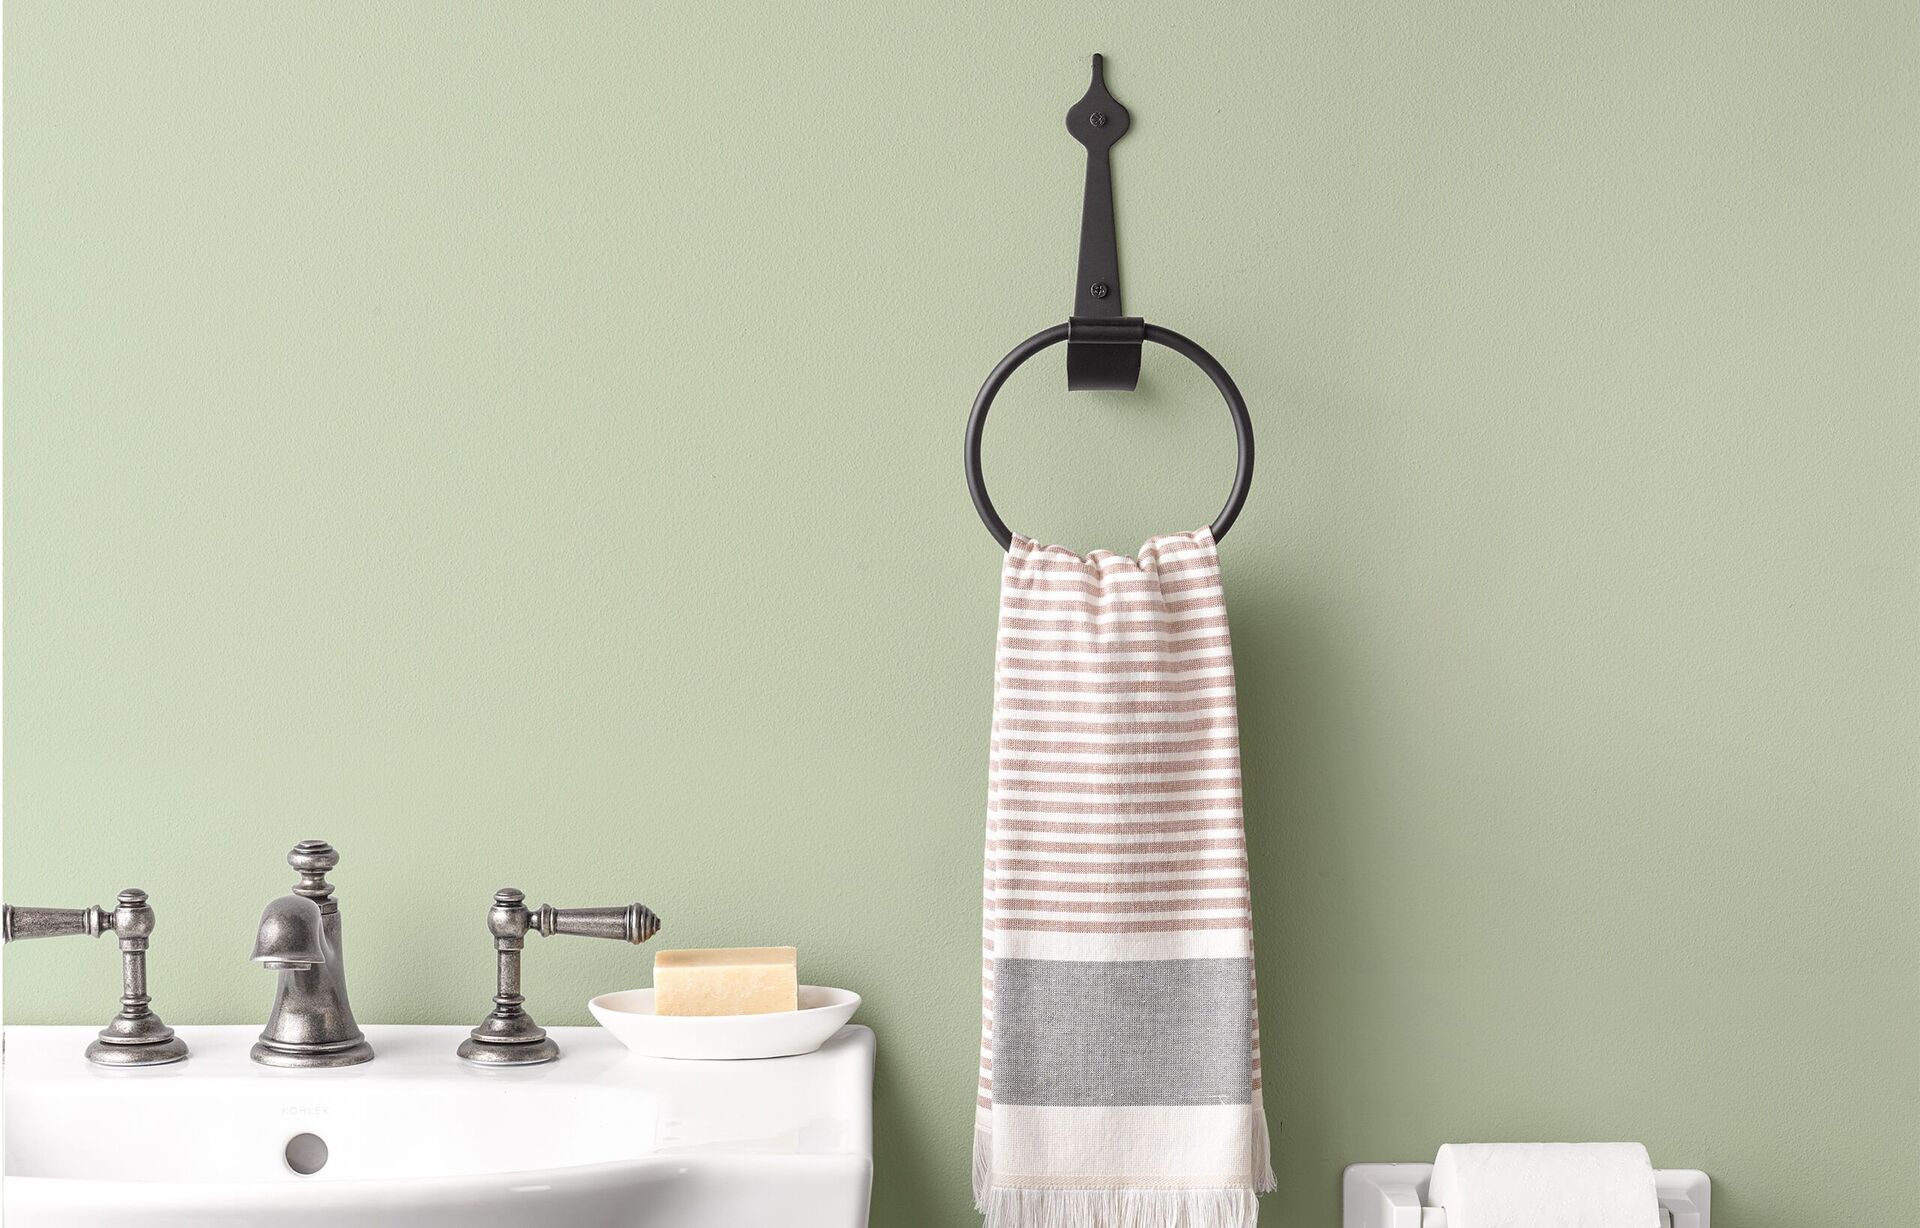 Where To Hang Towel Ring In Small Bathroom With Pedestal Sink